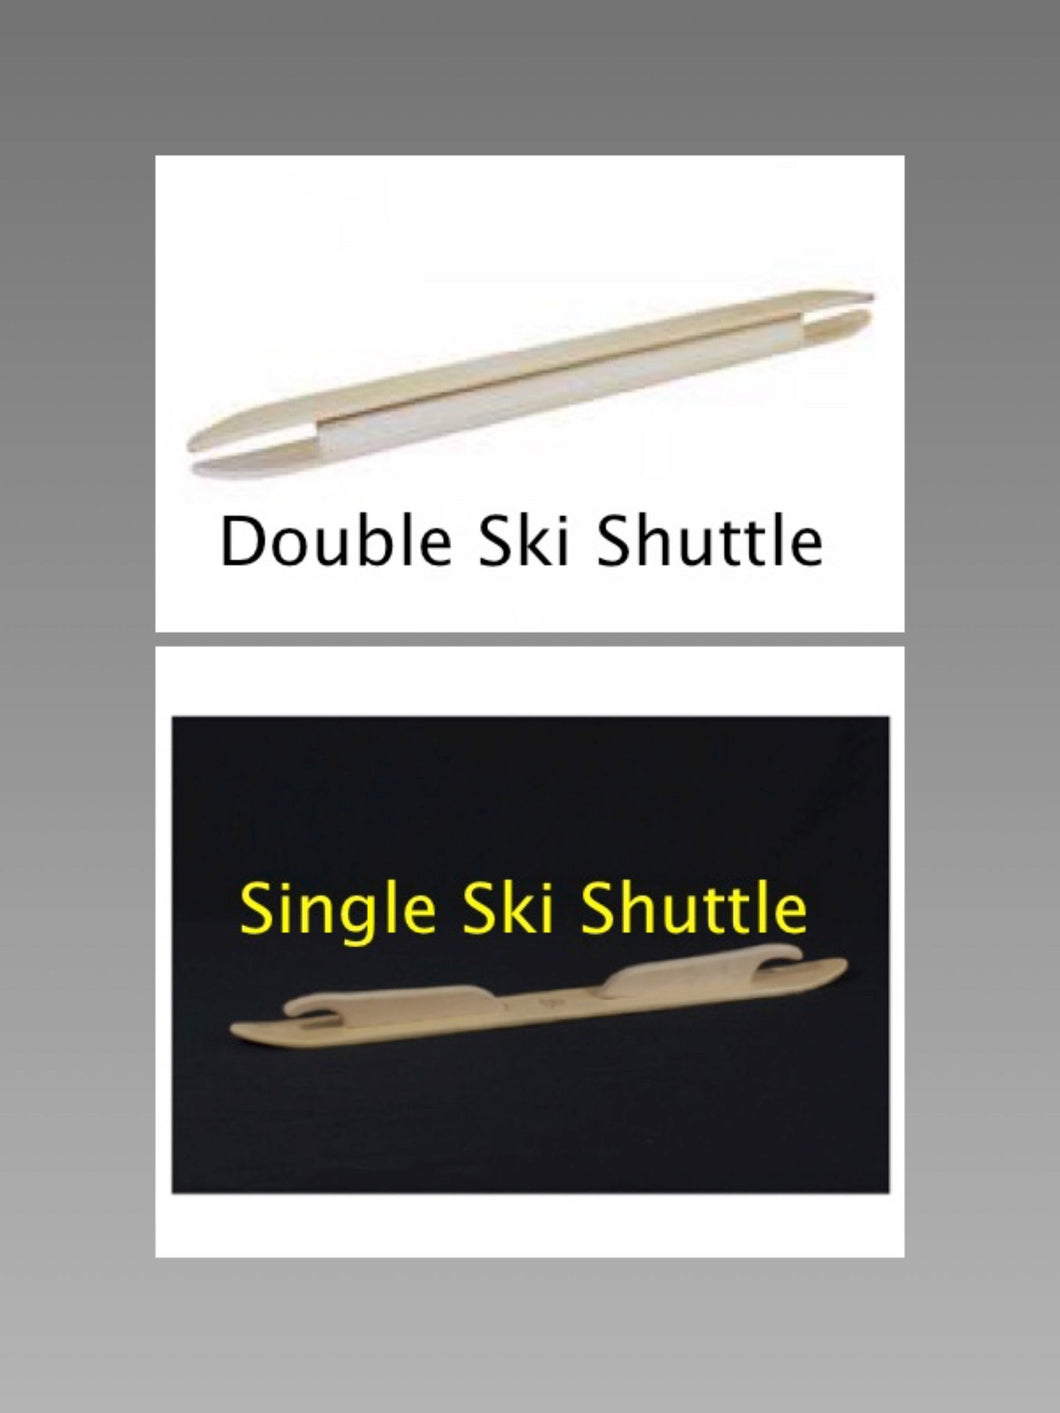 Wooden Single & Double Ski Shuttles Narrow Profile for Gliding Through Shed Glimakra Super Fast Shipping!